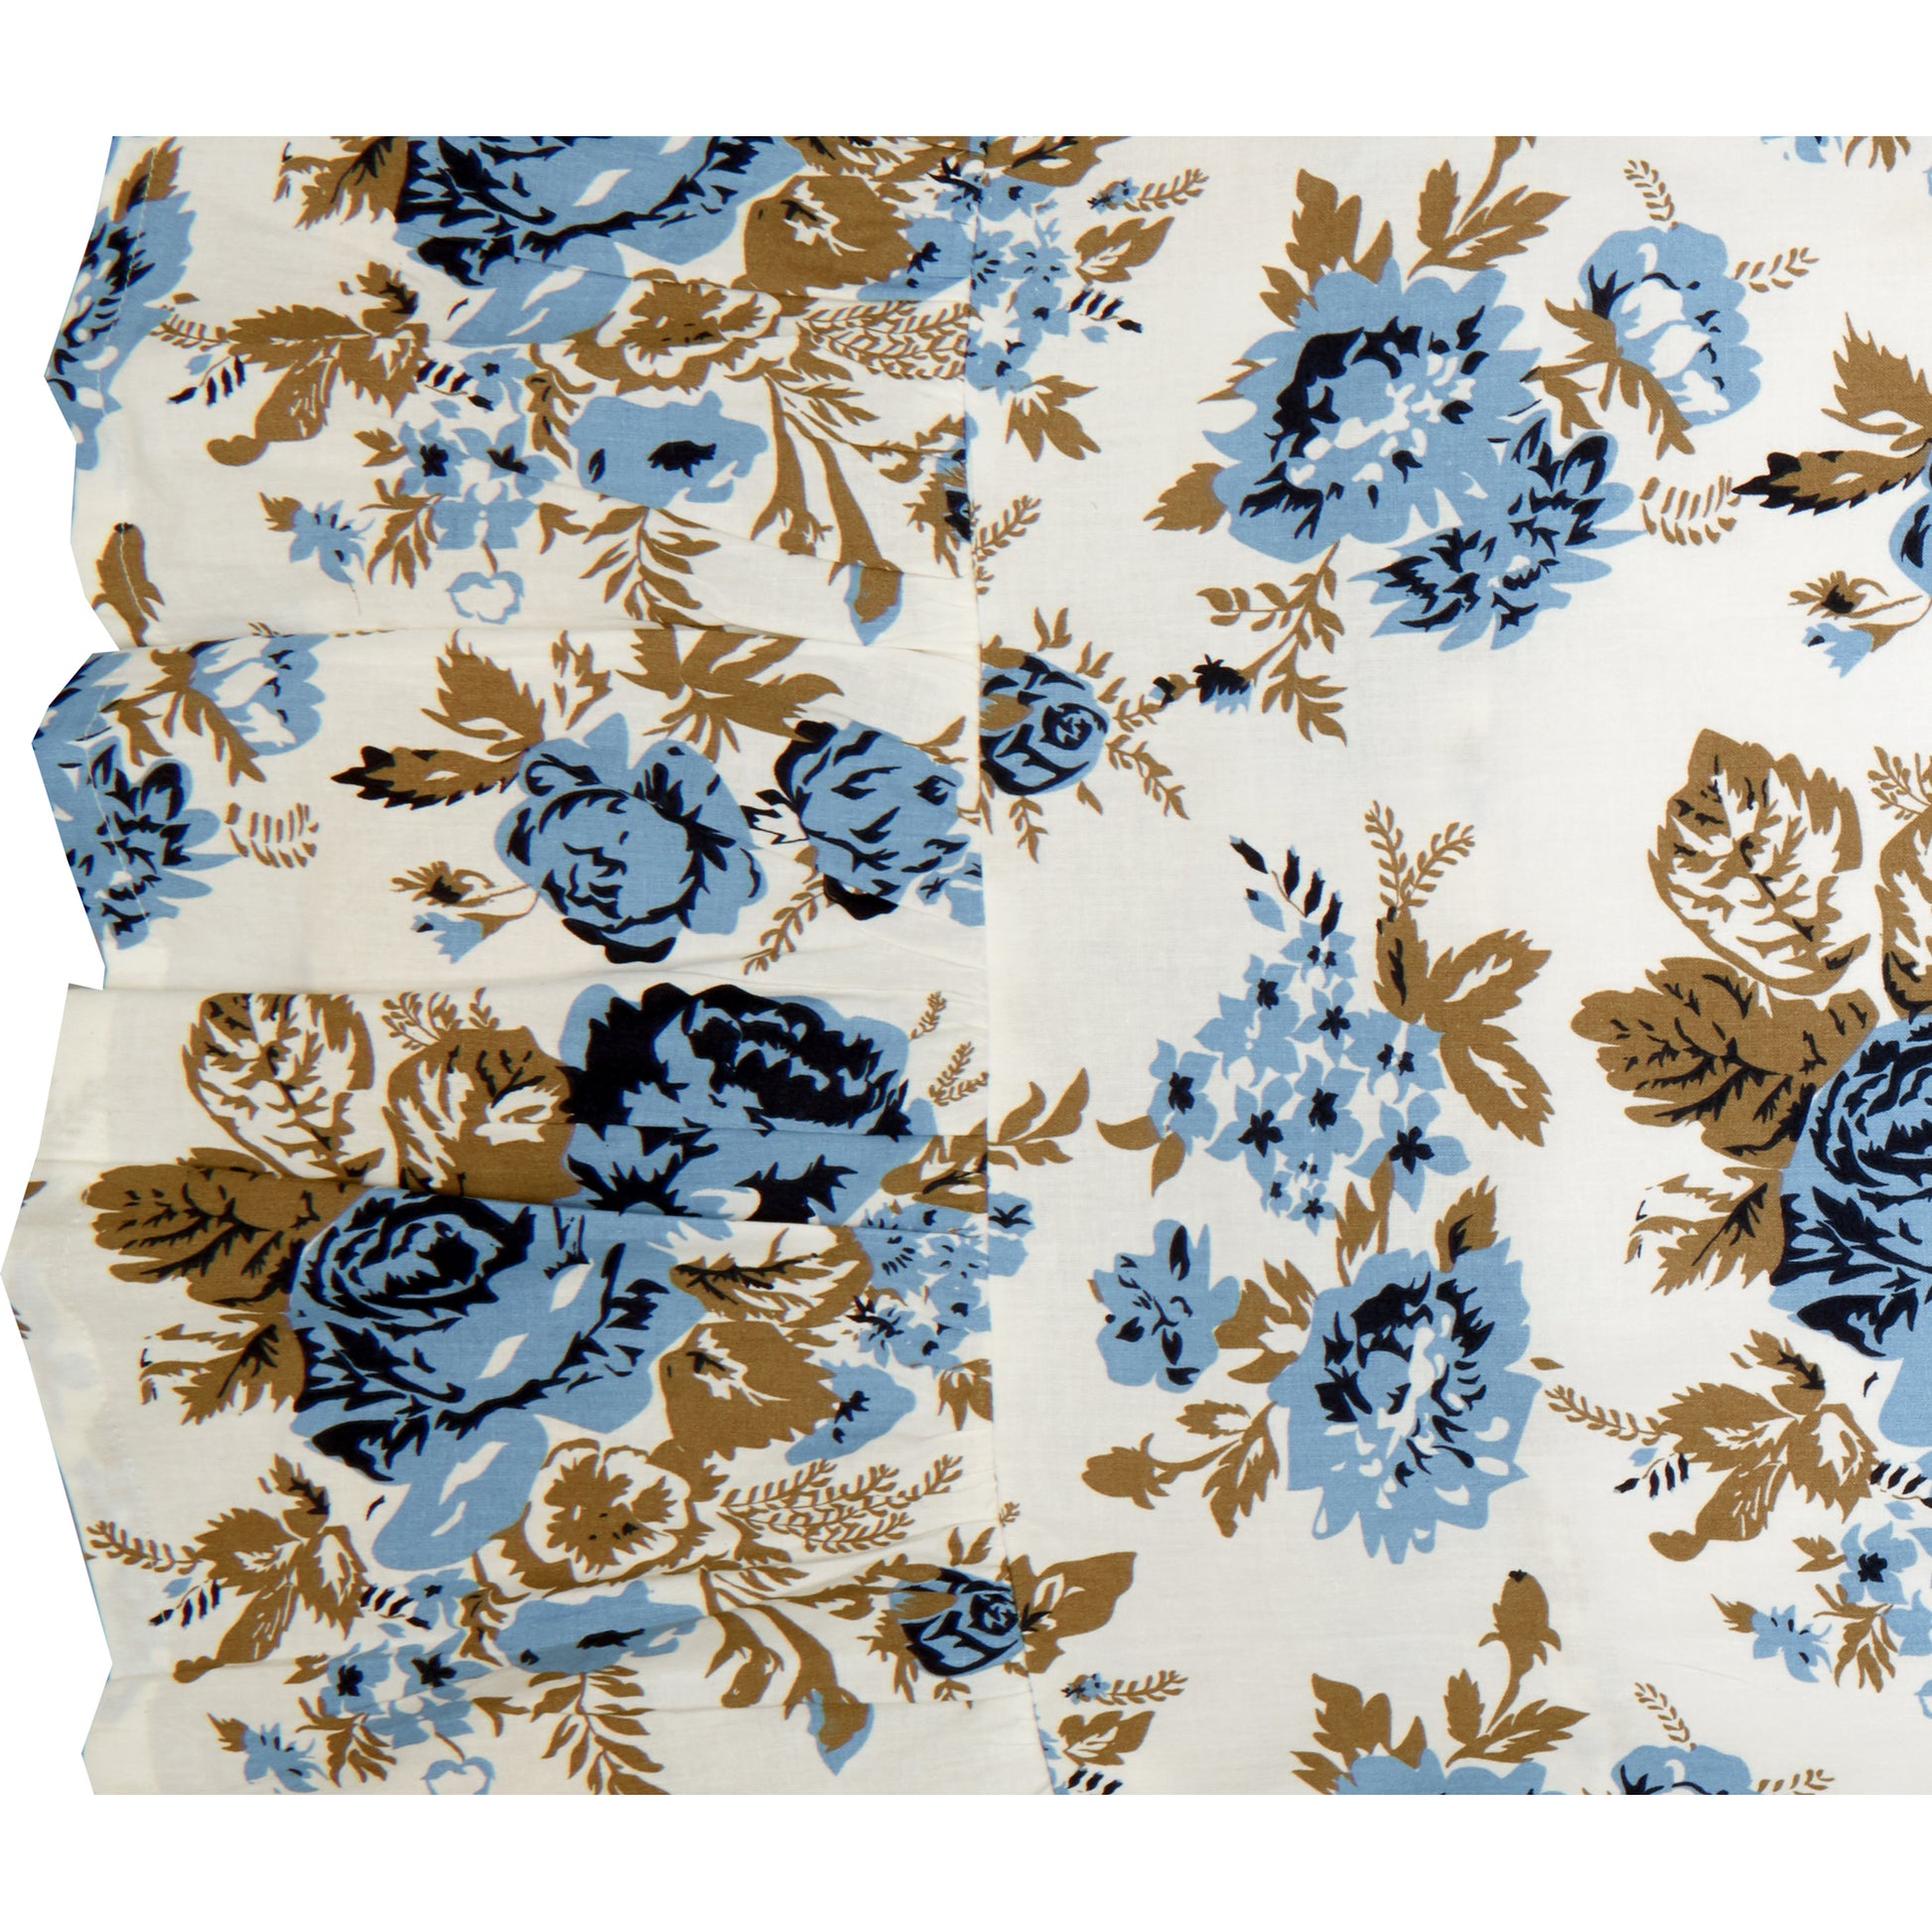 70000-Annie-Blue-Floral-Ruffled-King-Pillow-Case-Set-of-2-21x36-8-image-6